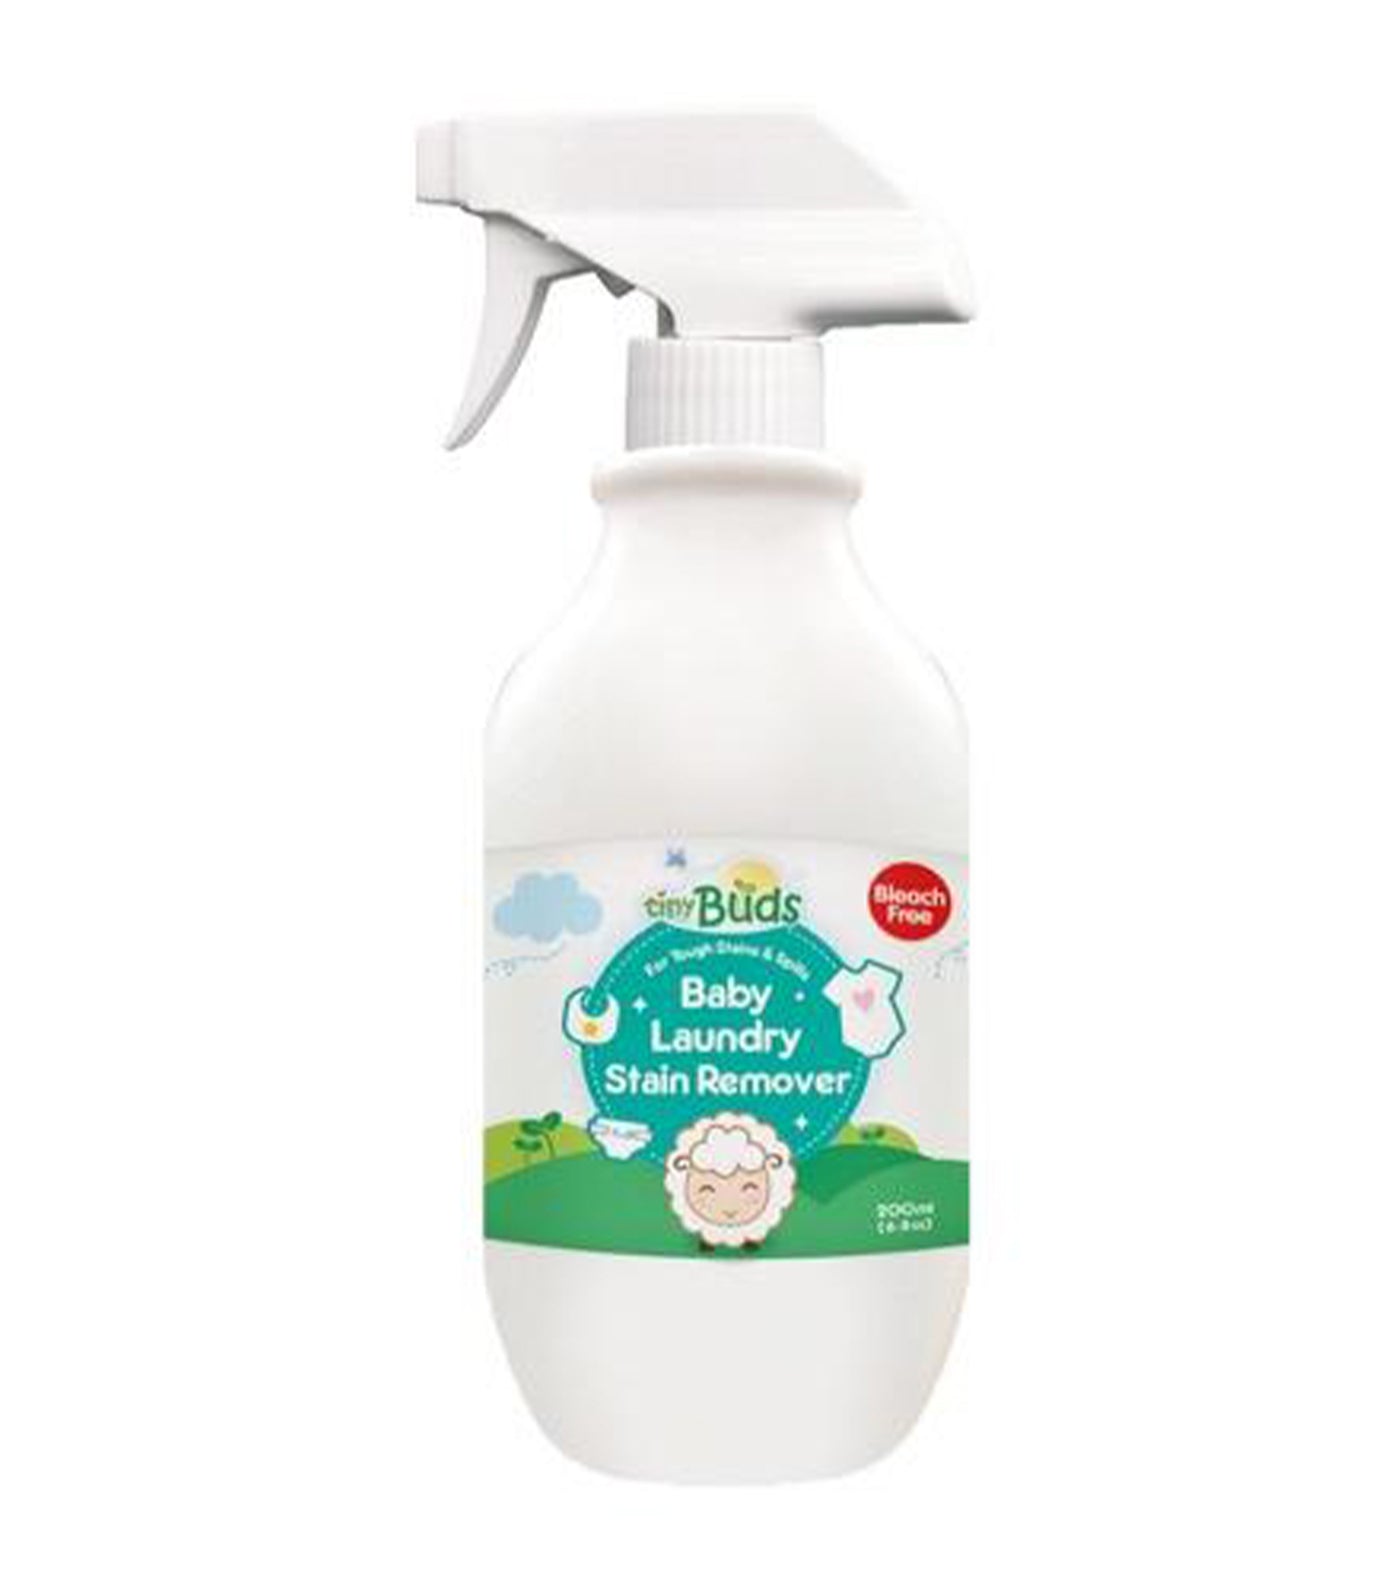 BUDS & BLOOMS Breastfeeding and Pump Lubrication Oil – Tiny Buds Baby  Naturals